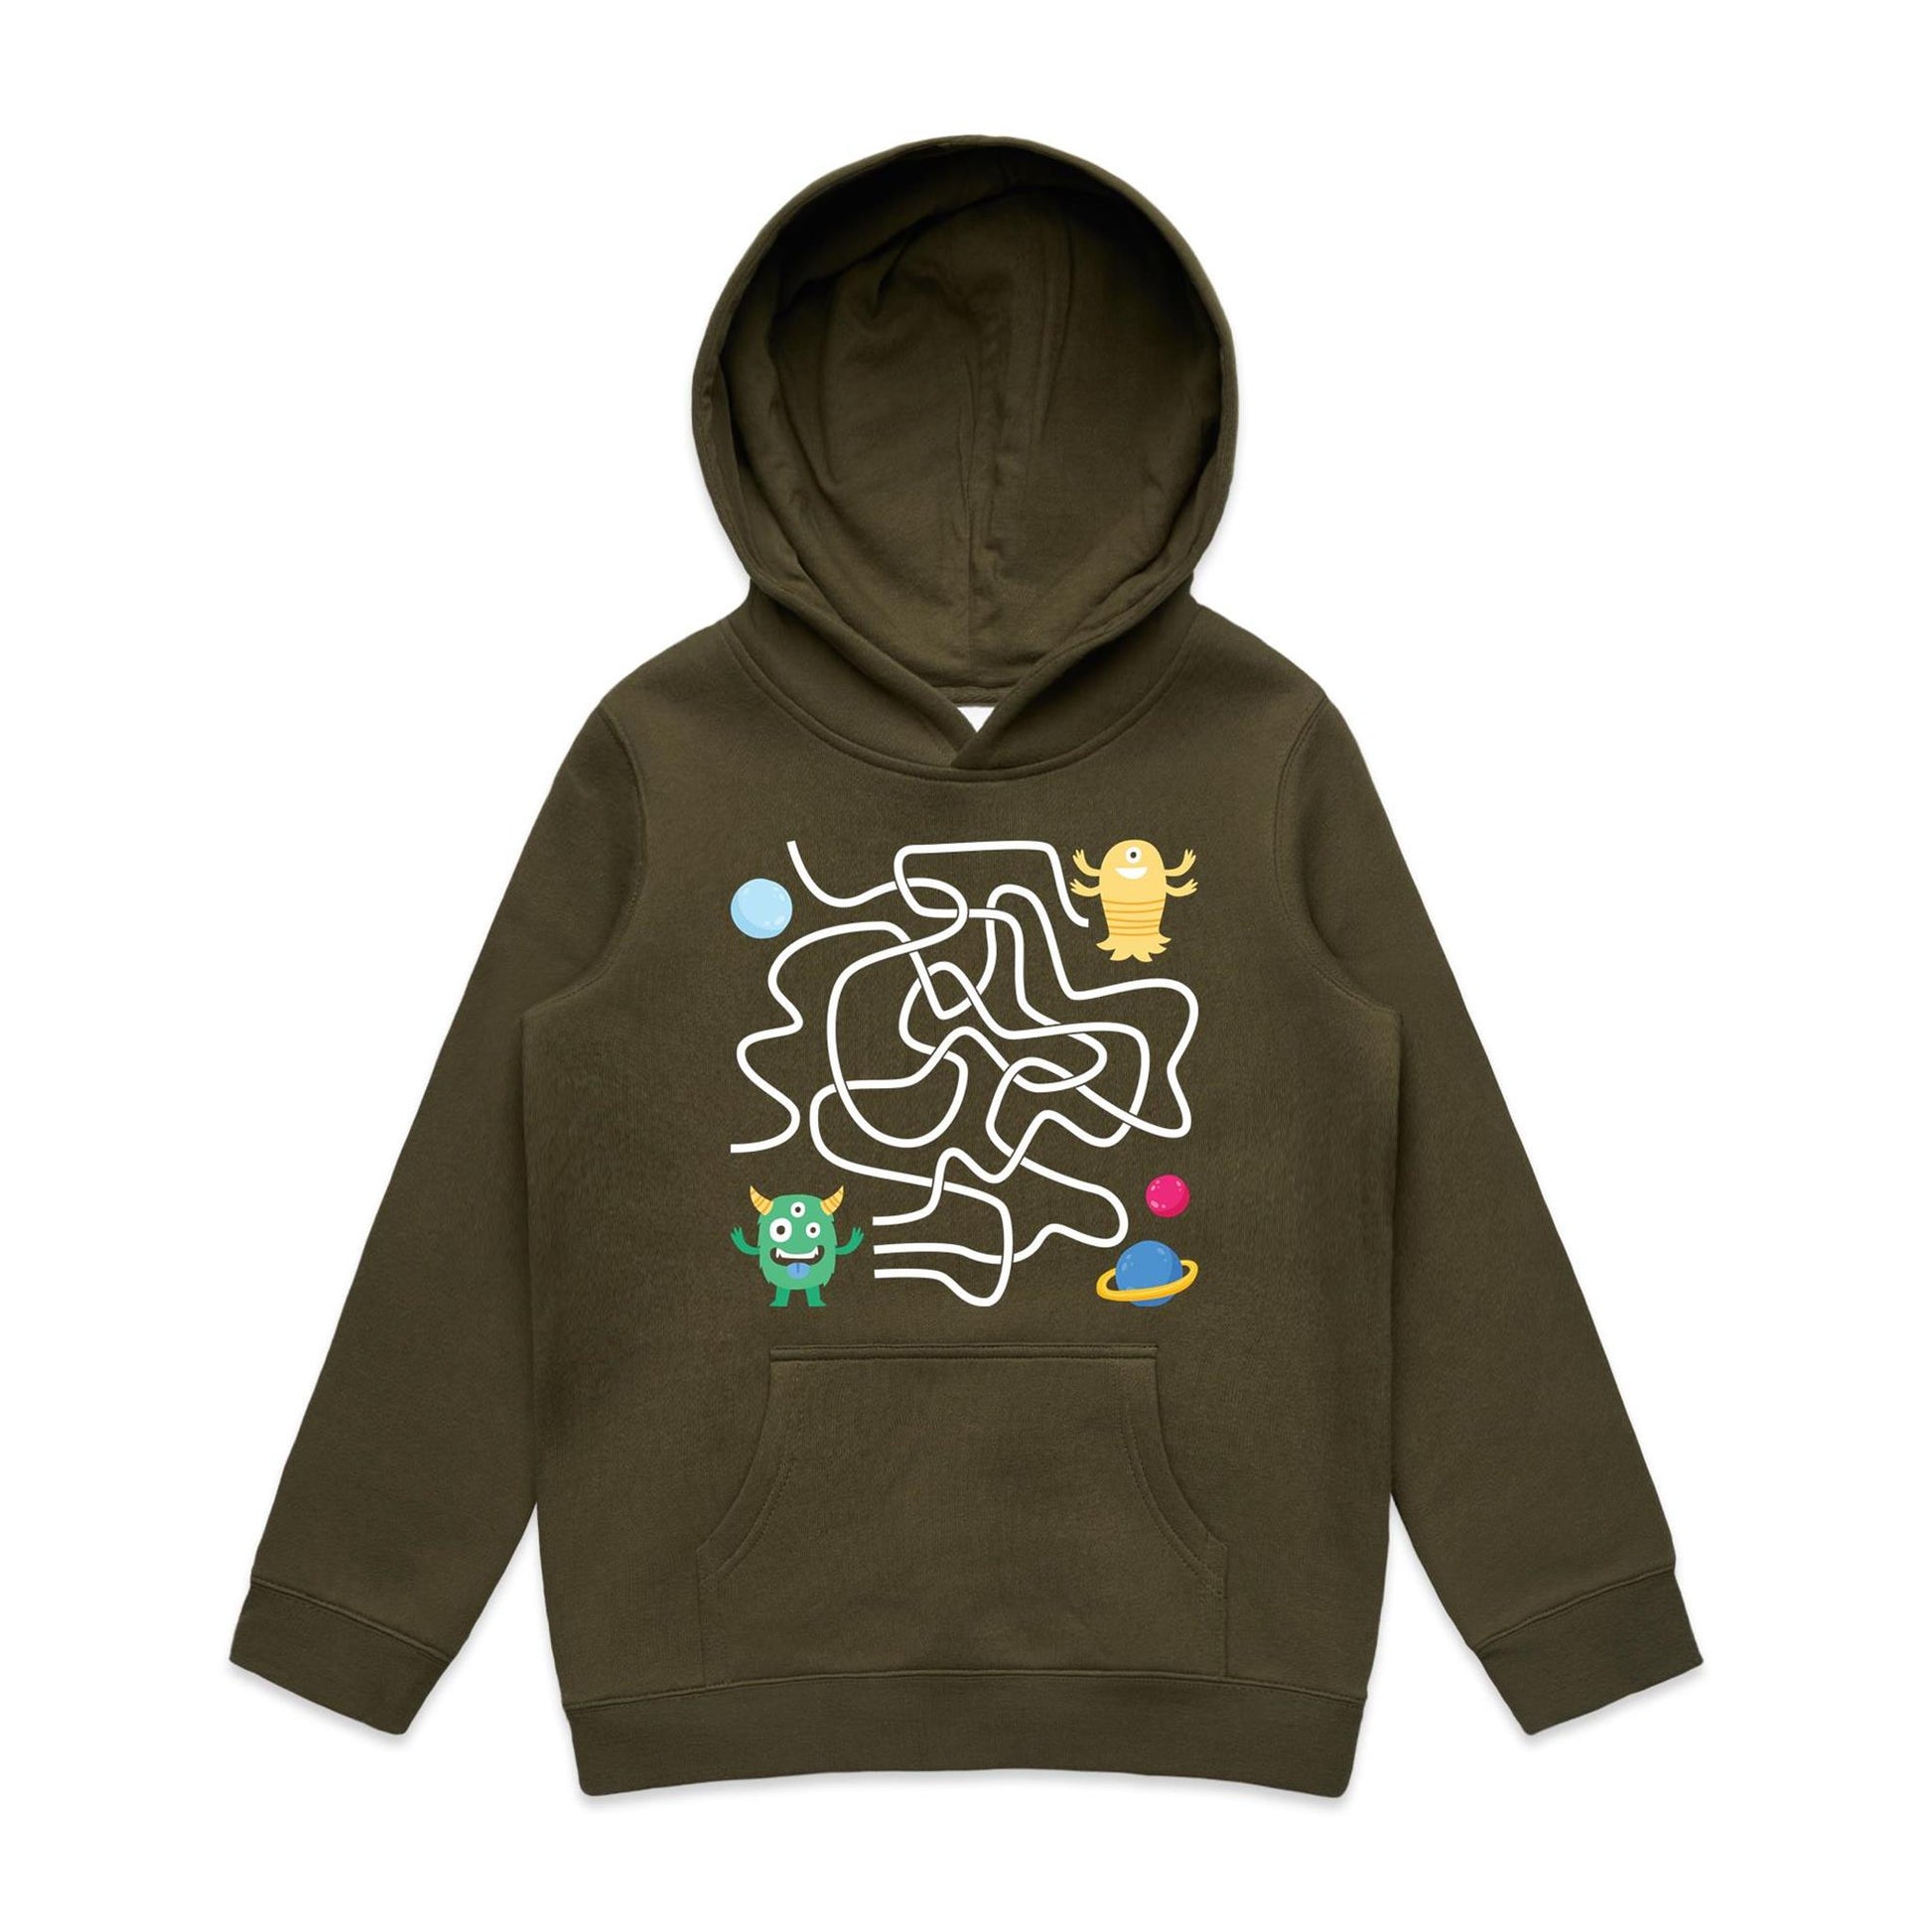 Find The Right Path, Space Alien - Youth Supply Hood Army Kids Hoodie Sci Fi Space